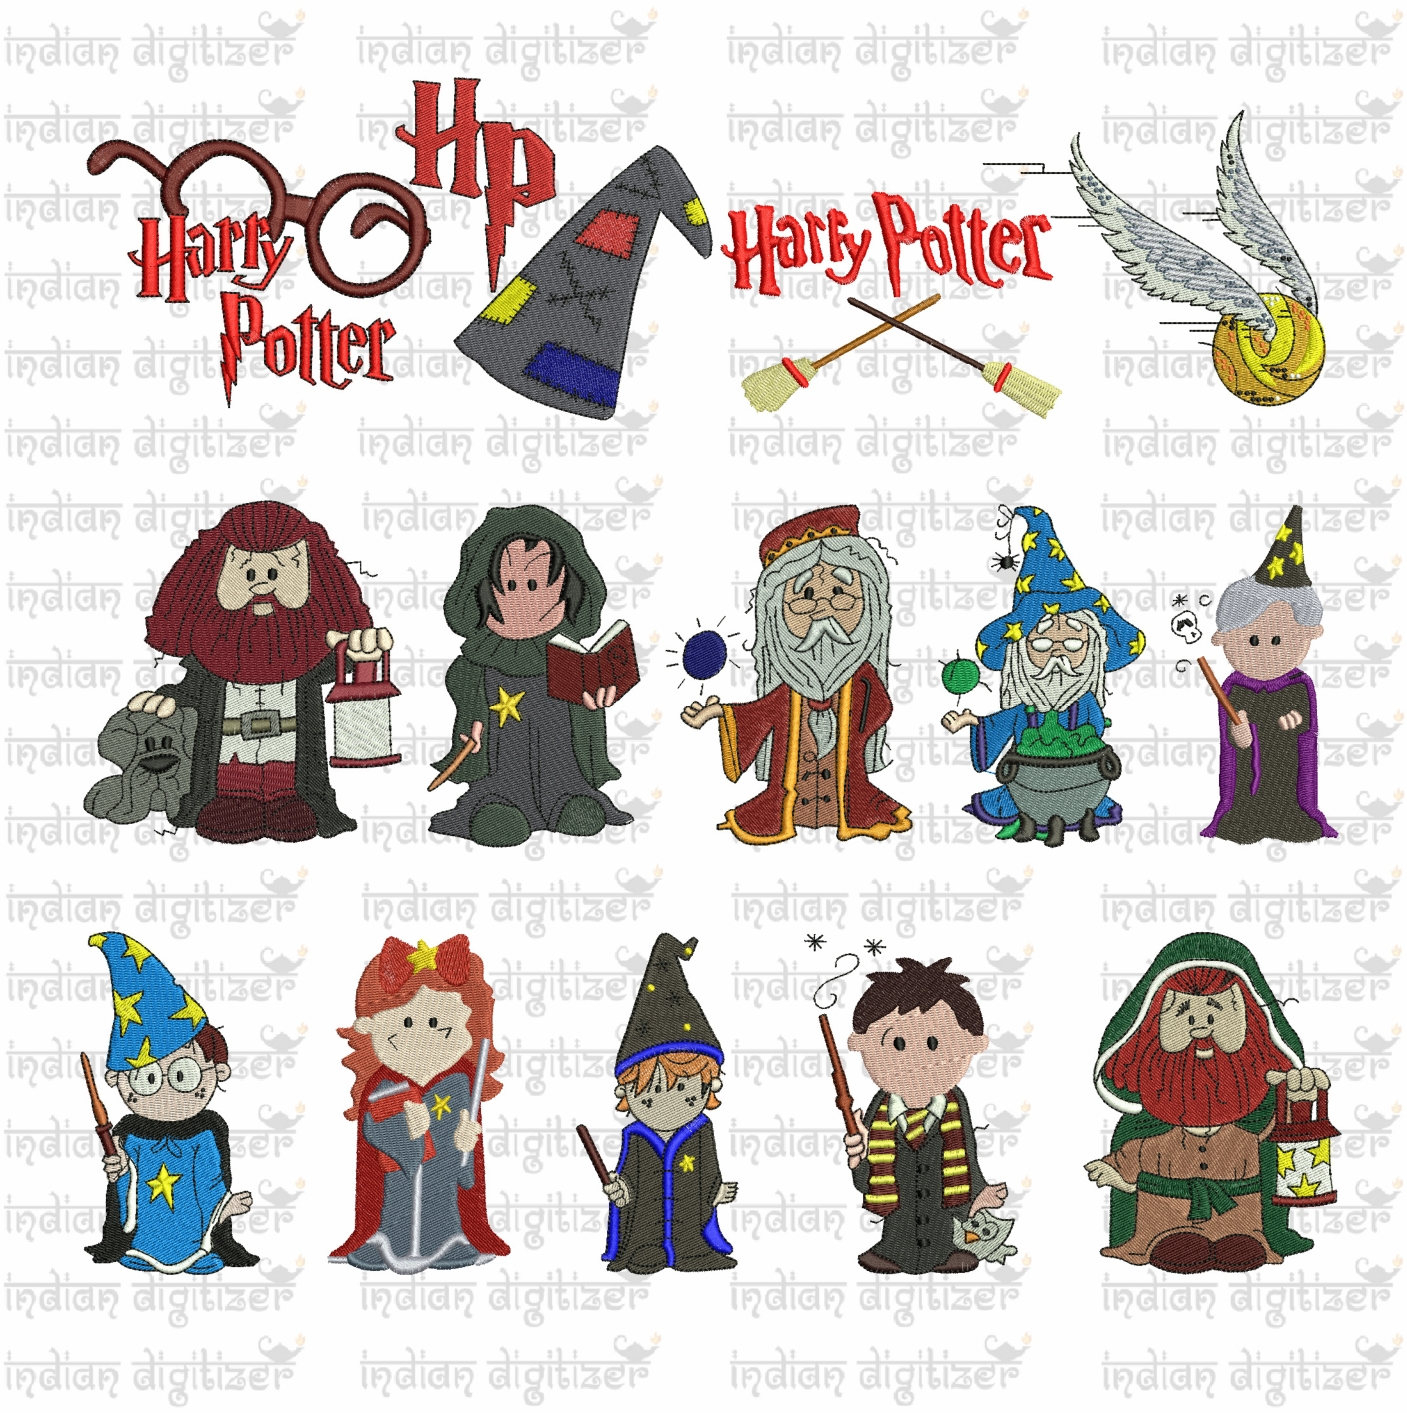 Machine Embroidery Patterns Free Harry Potter Embroidery Design Chibis For 4in Hoops A Total Of 14 Designs Buy The Whole Set And Get 6 Free Designs Worth Usd16